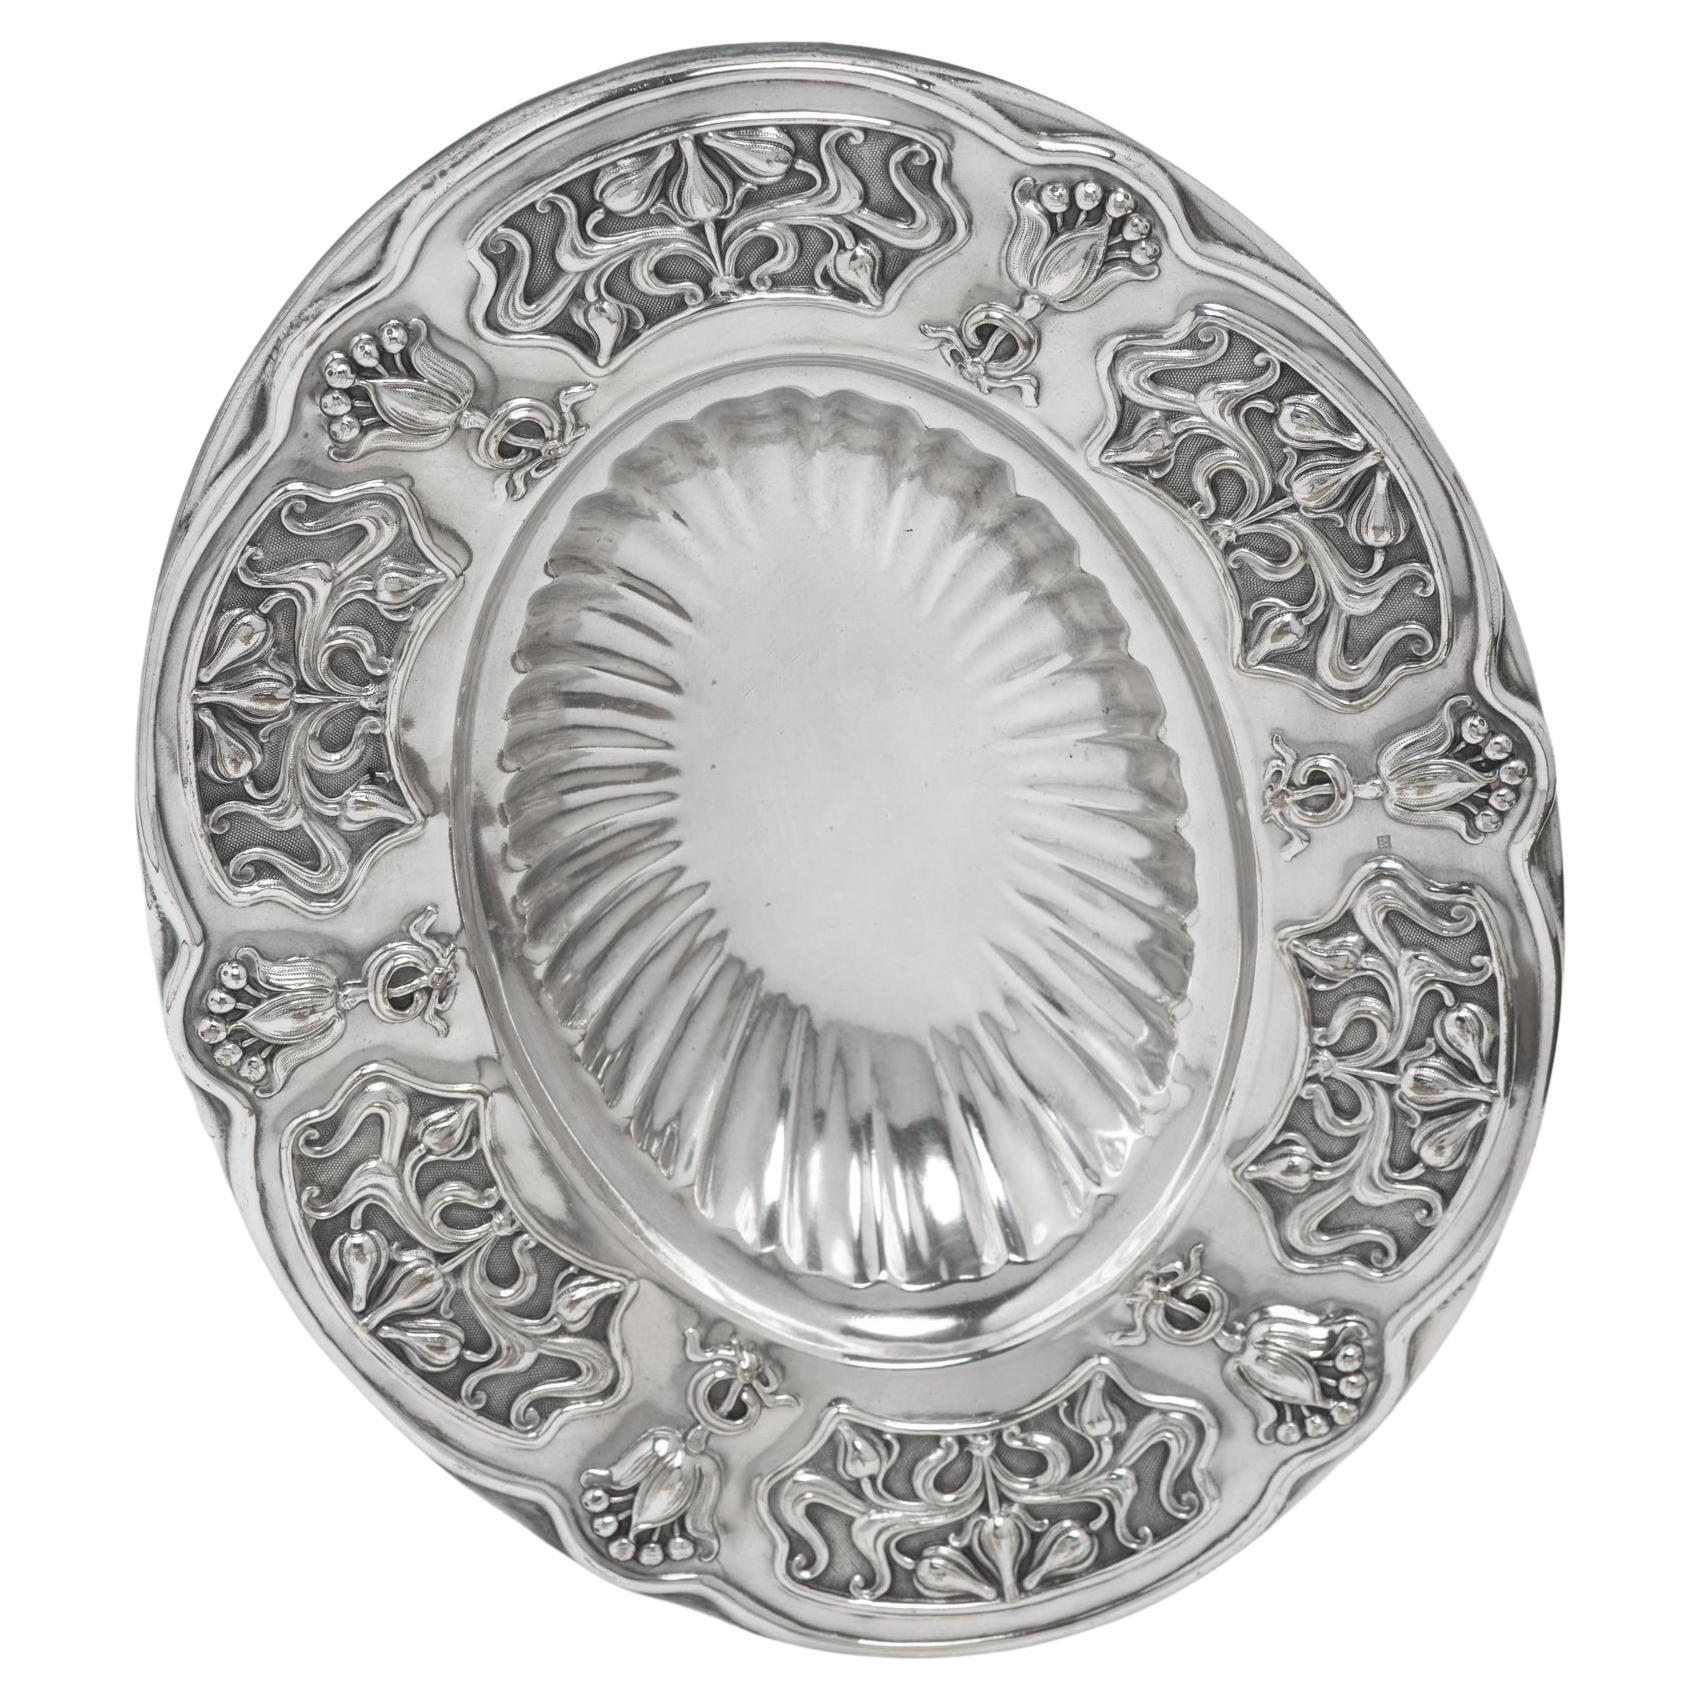 nr. 1838 - Art Nouveau or Liberty rare oval centerpiece in silver plate, very elegant with flowers and arabesques.
Placed on a table or a cabinet : in the hall for business cards, in the living room for sweets, in the bedroom for ..something other.